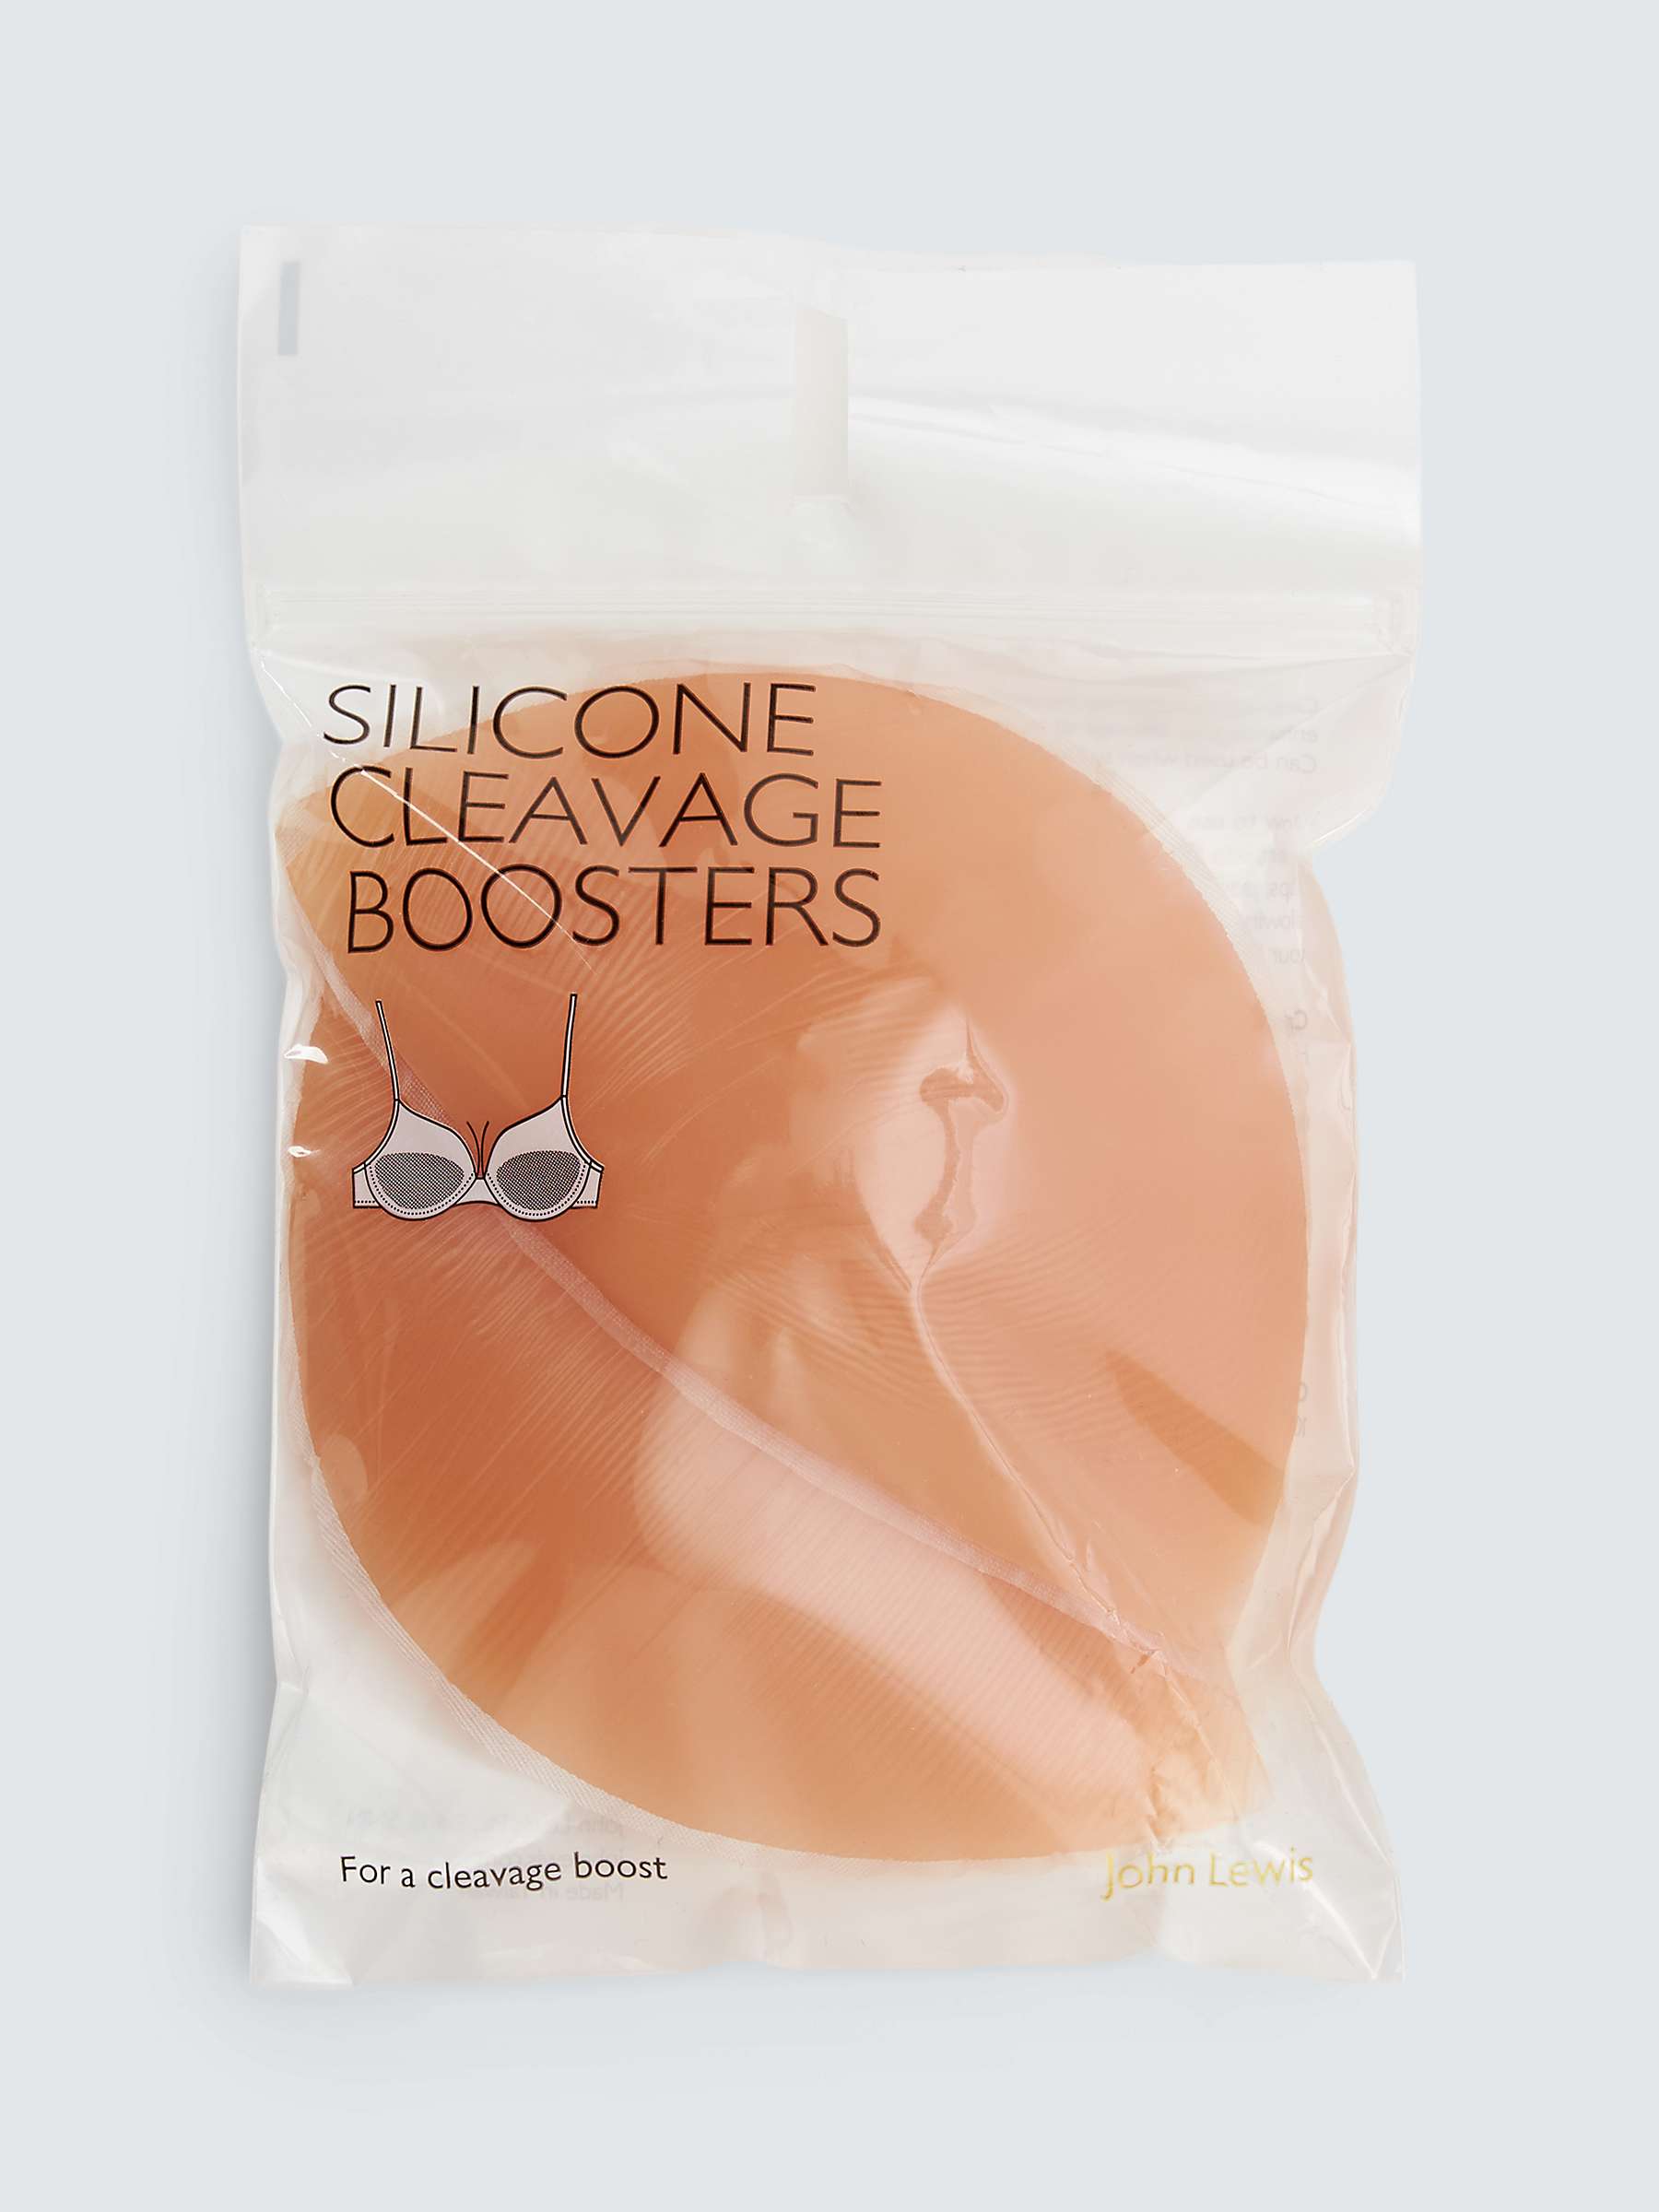 Buy John Lewis Silicone Cleavage Boosters Online at johnlewis.com